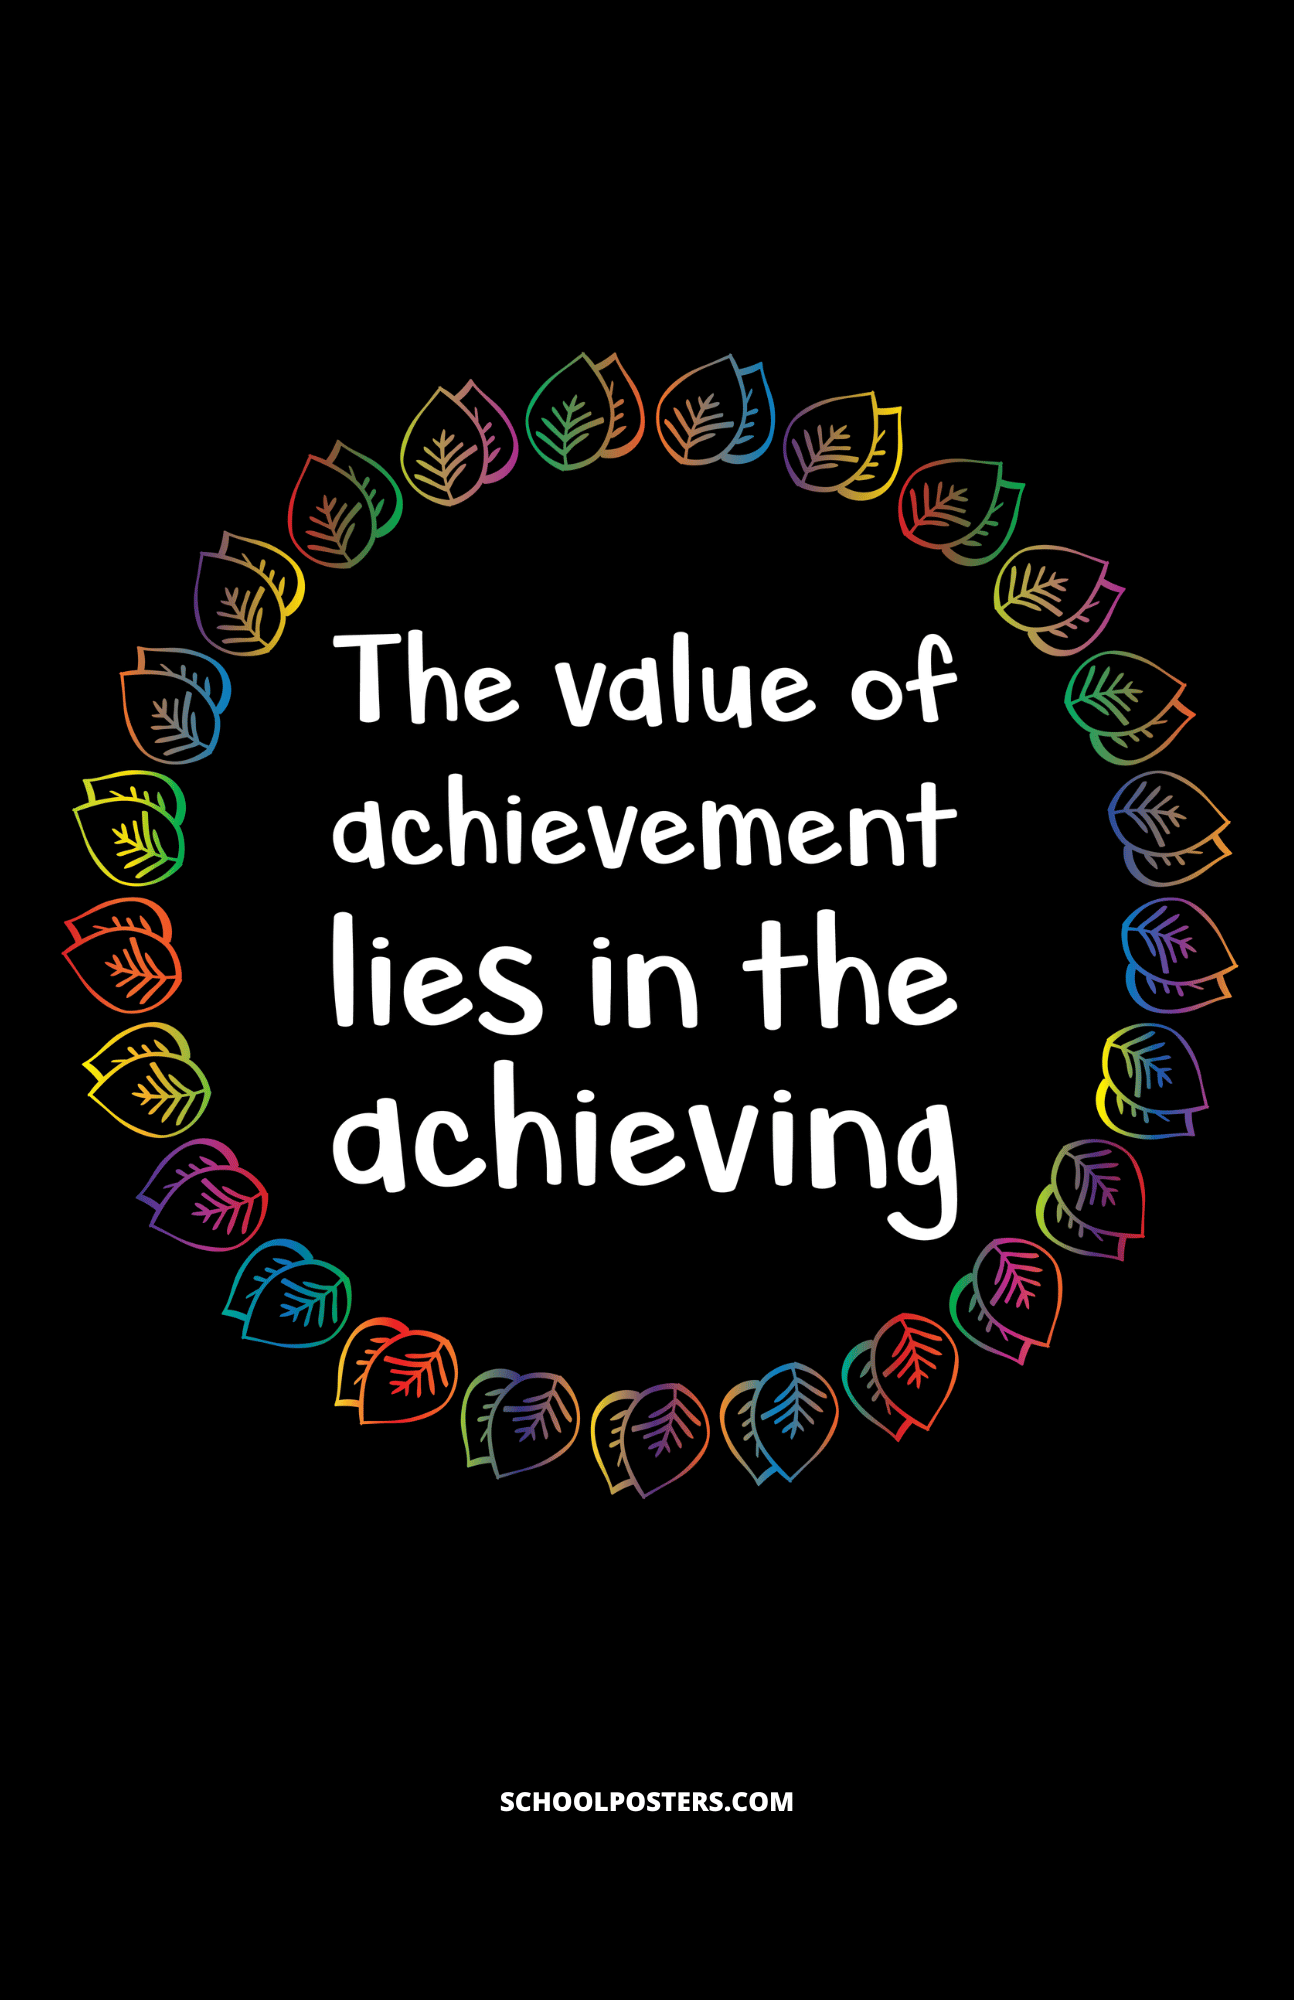 The Value Of Achievement Poster